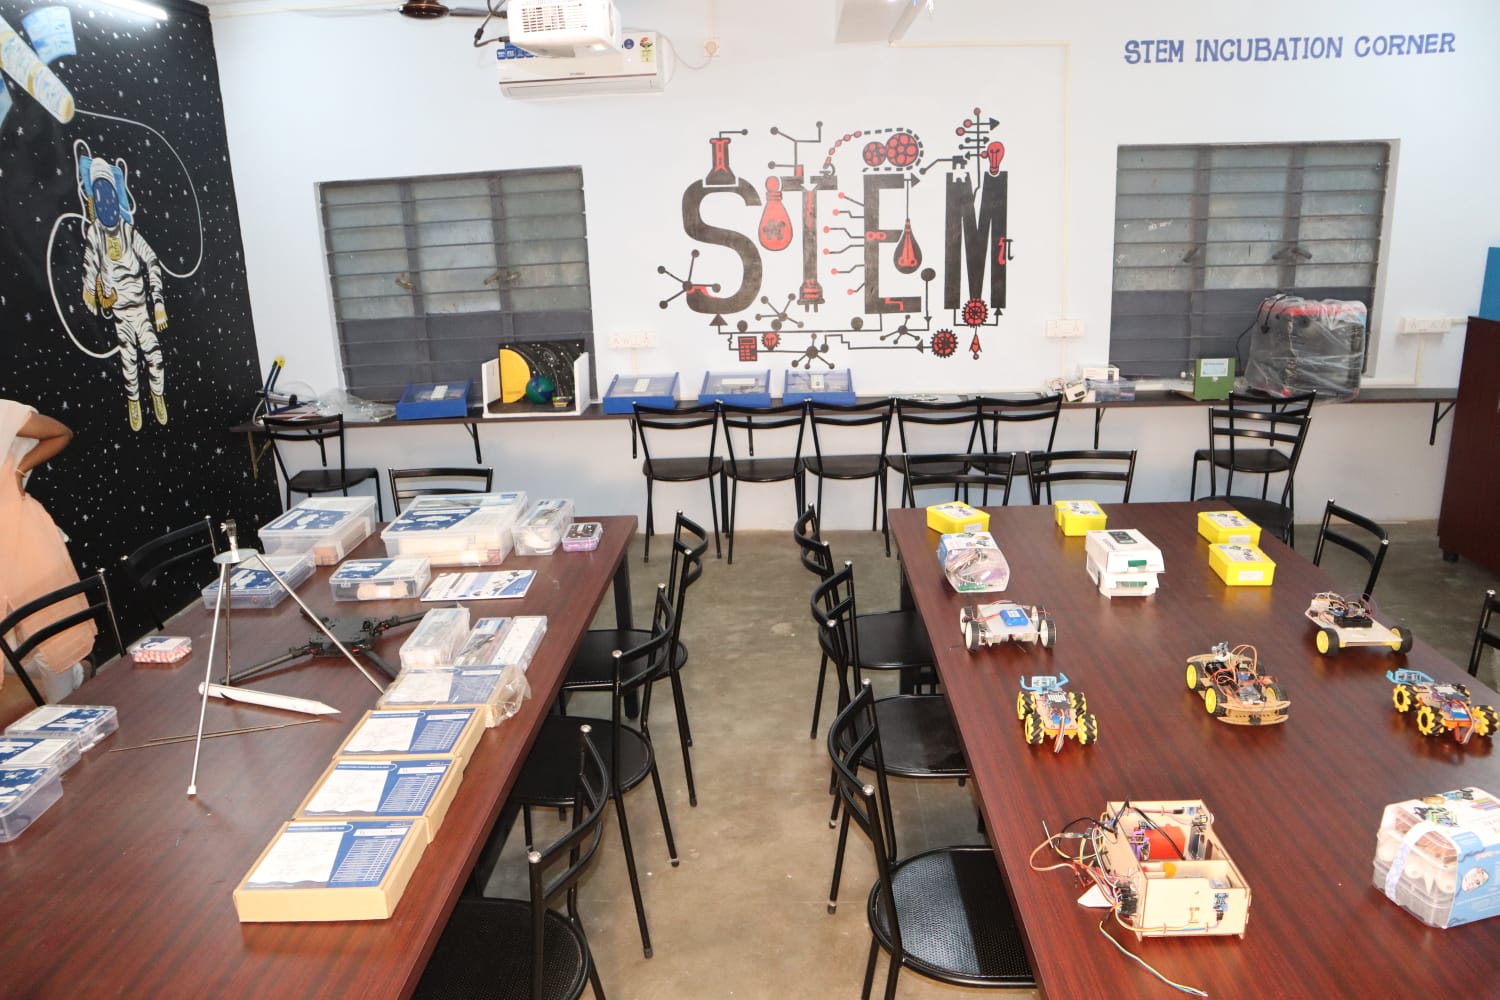 By connecting with underserved schools without STEM labs, children in remote areas can now improve their scientific knowledge.